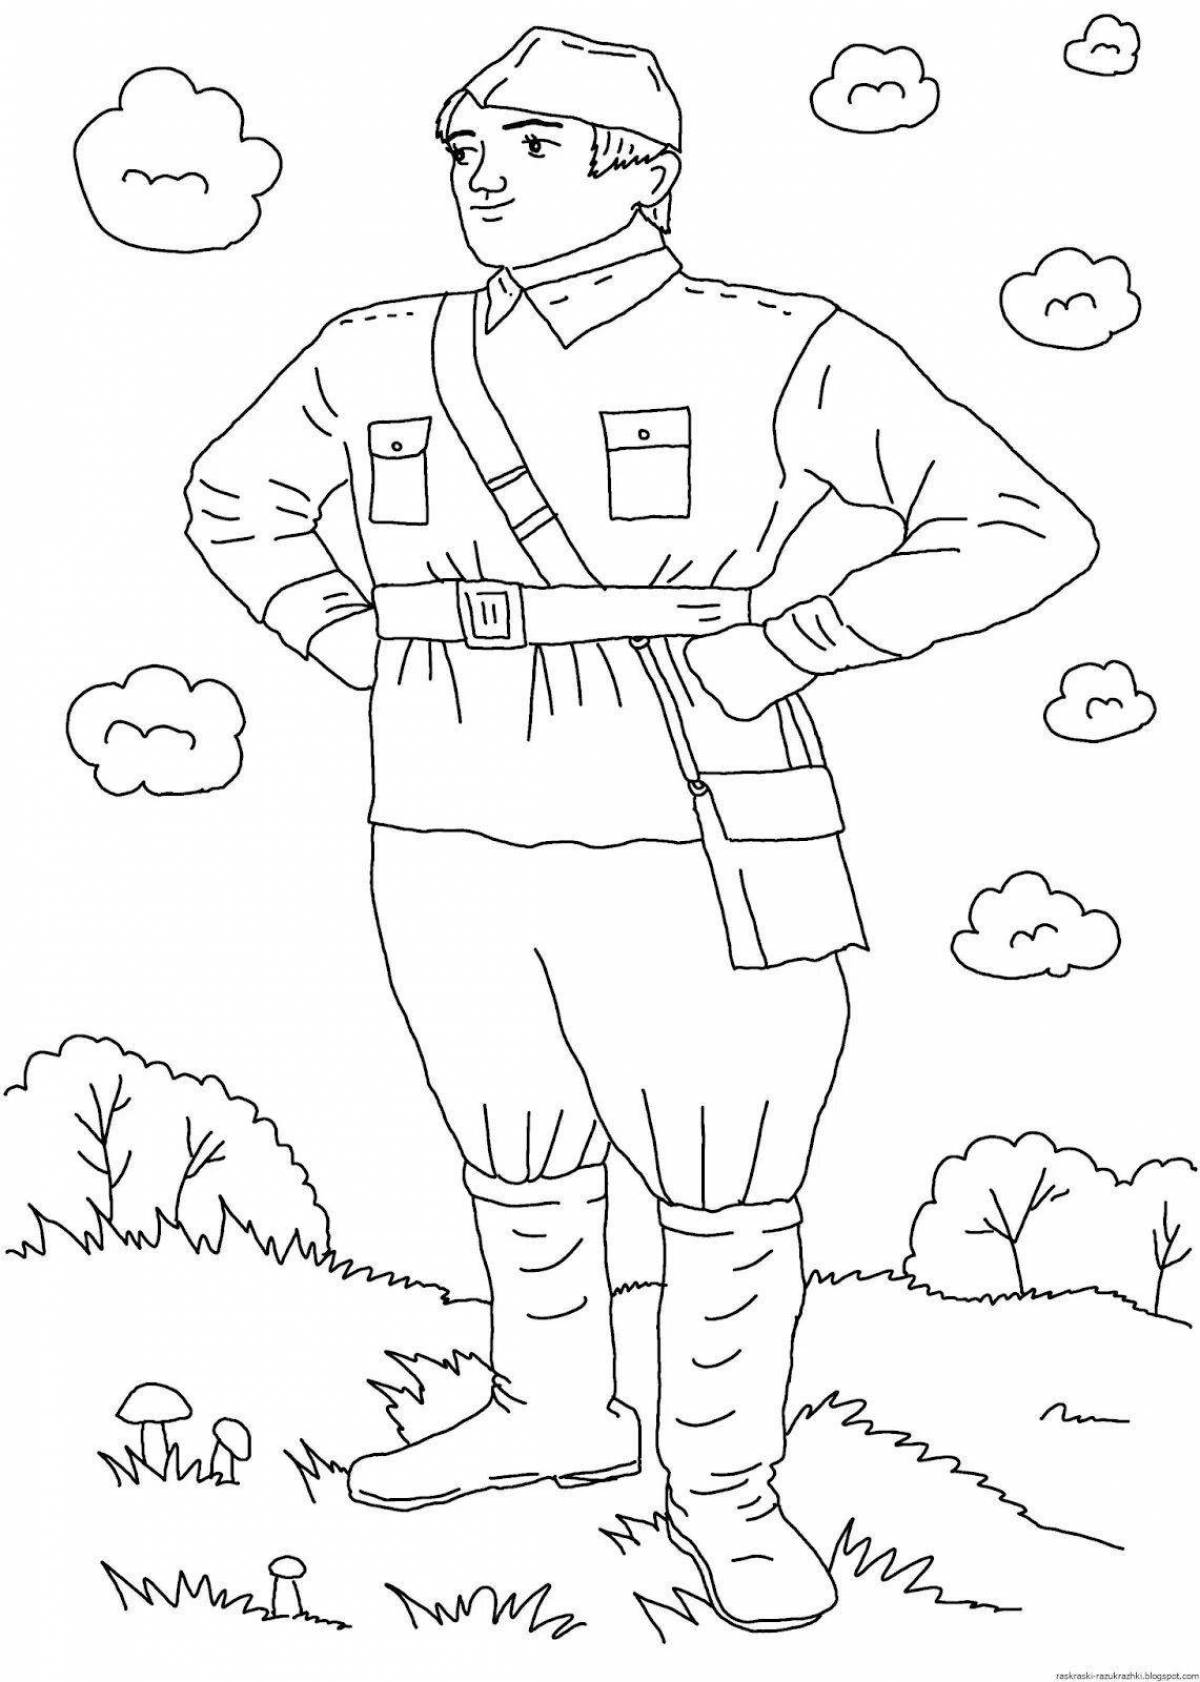 Amusing coloring Russian soldier for children